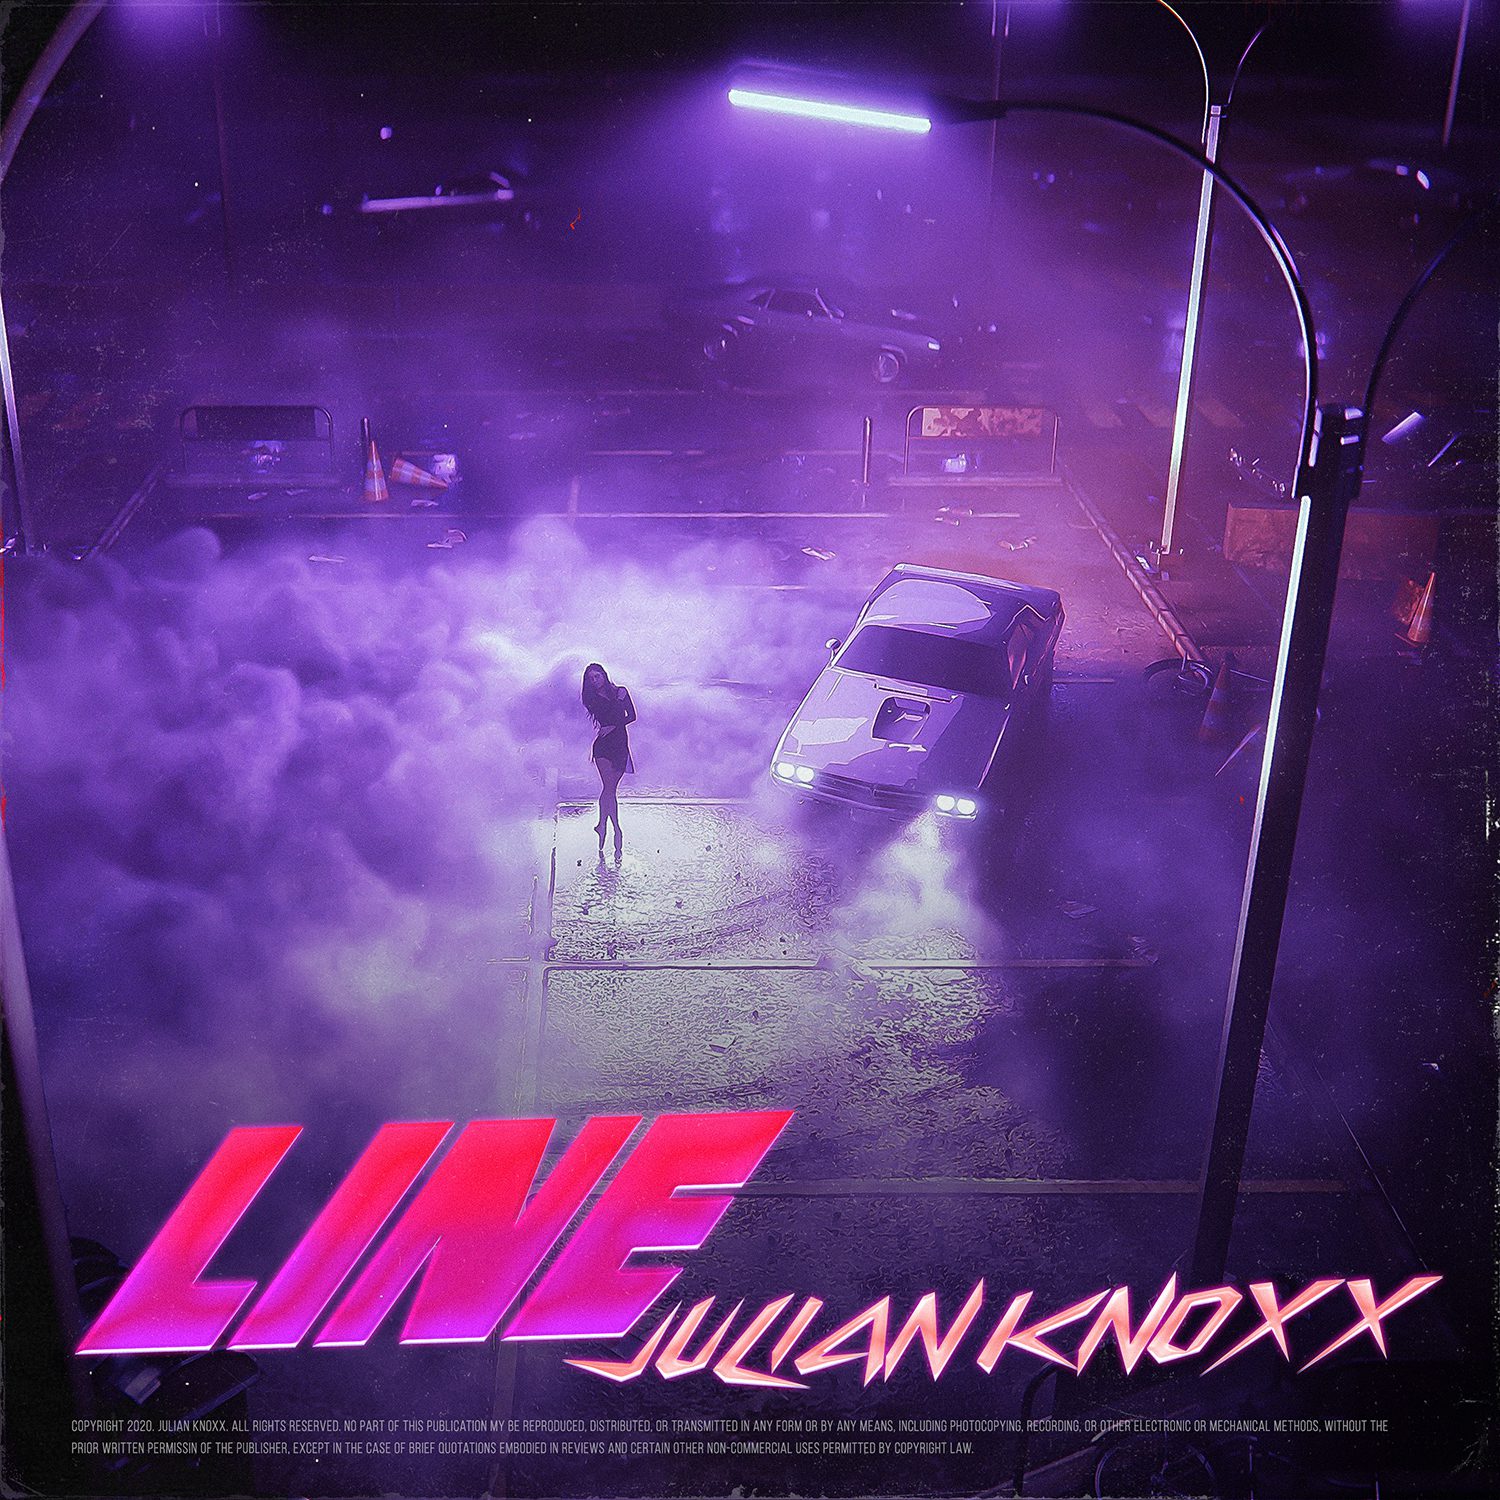 Check Out ‘Line’ The New Banger By JULIAN KNOXX